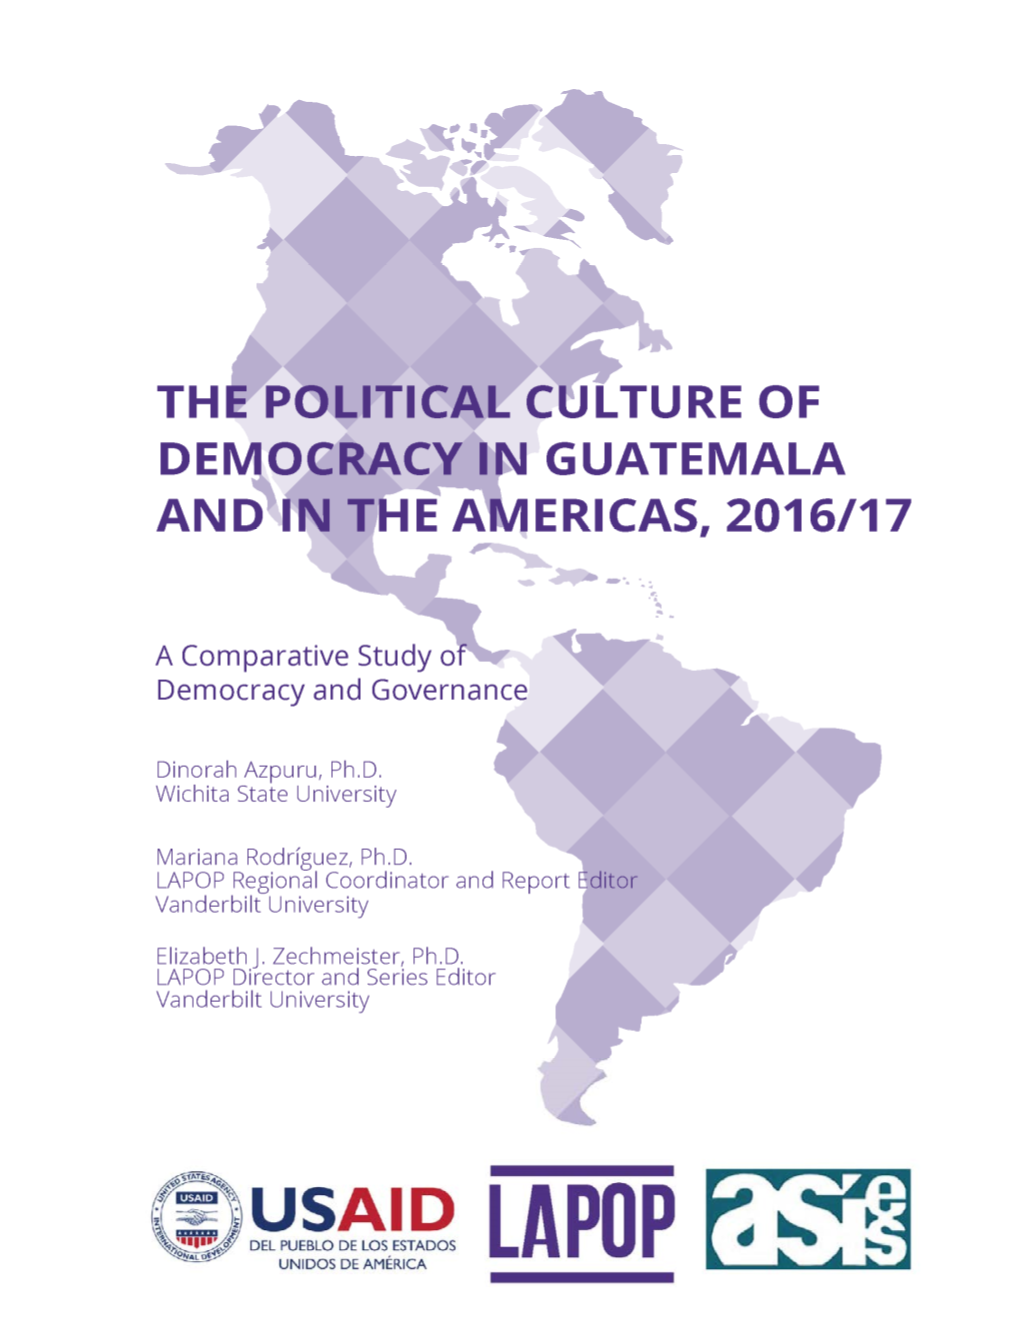 The Political Culture of Democracy in Guatemala and in the Americas, 2016/17: a Comparative Study of Democracy and Governance